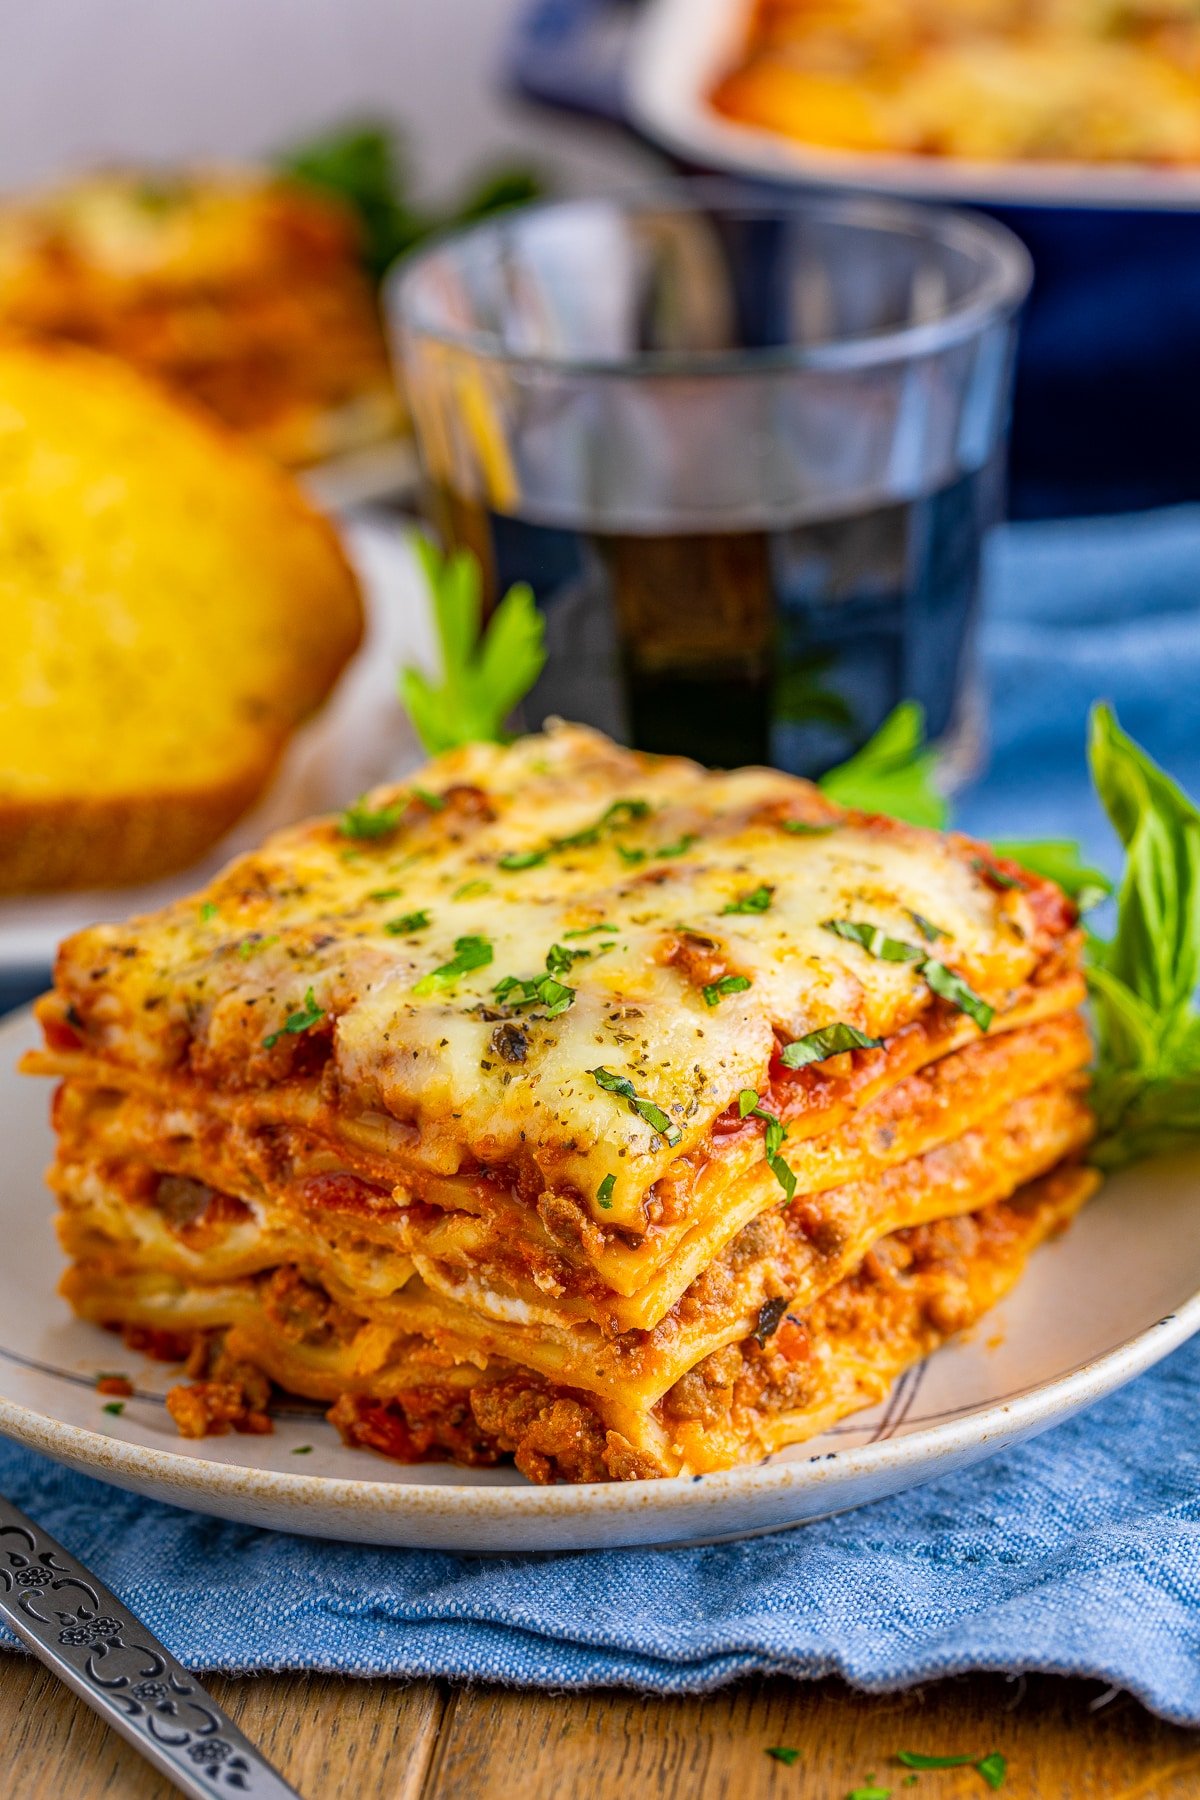 Slice of Homemade Lasagna on plate with drink and garlic toast in background.